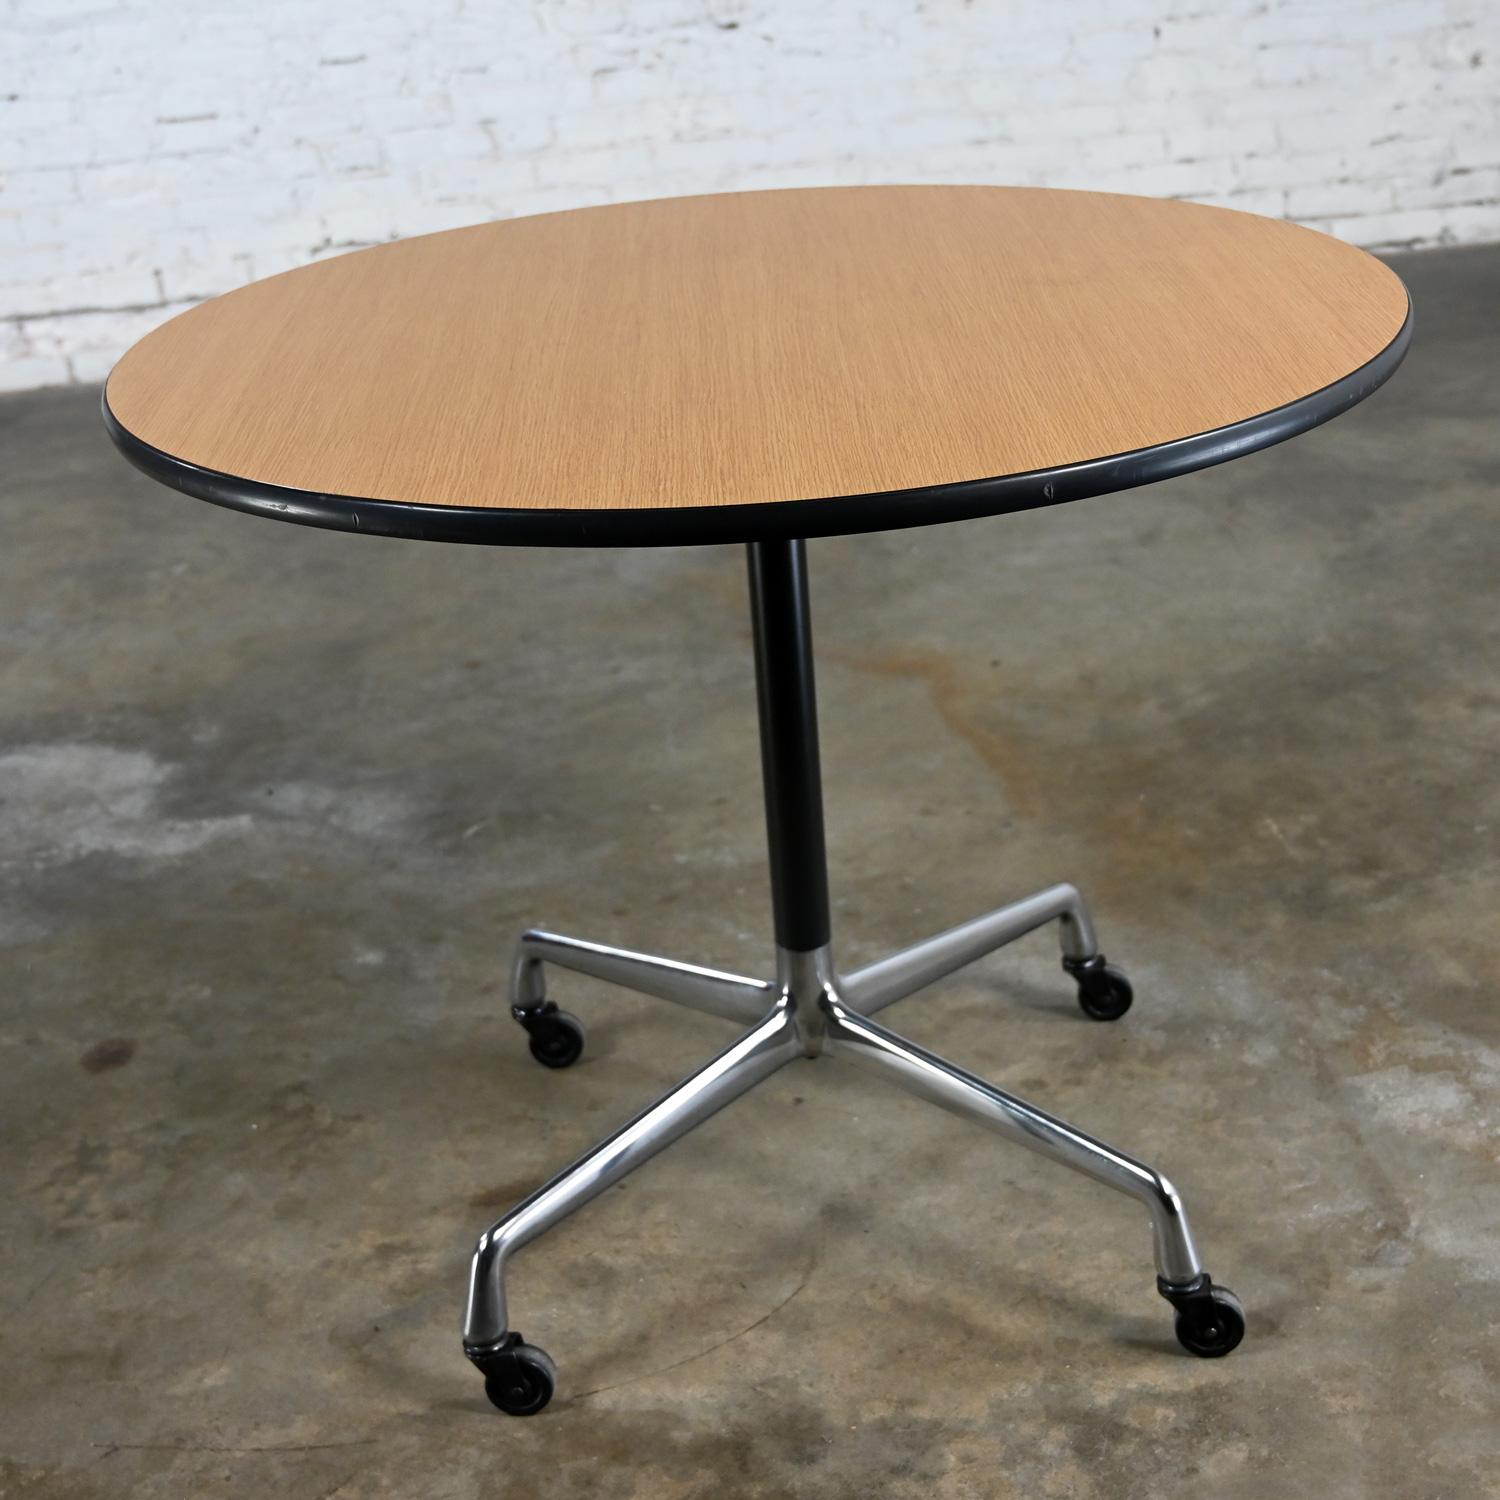 Eames Herman Miller Round Table Universal Base Casters & 36” Blonde Laminate Top For Sale 2